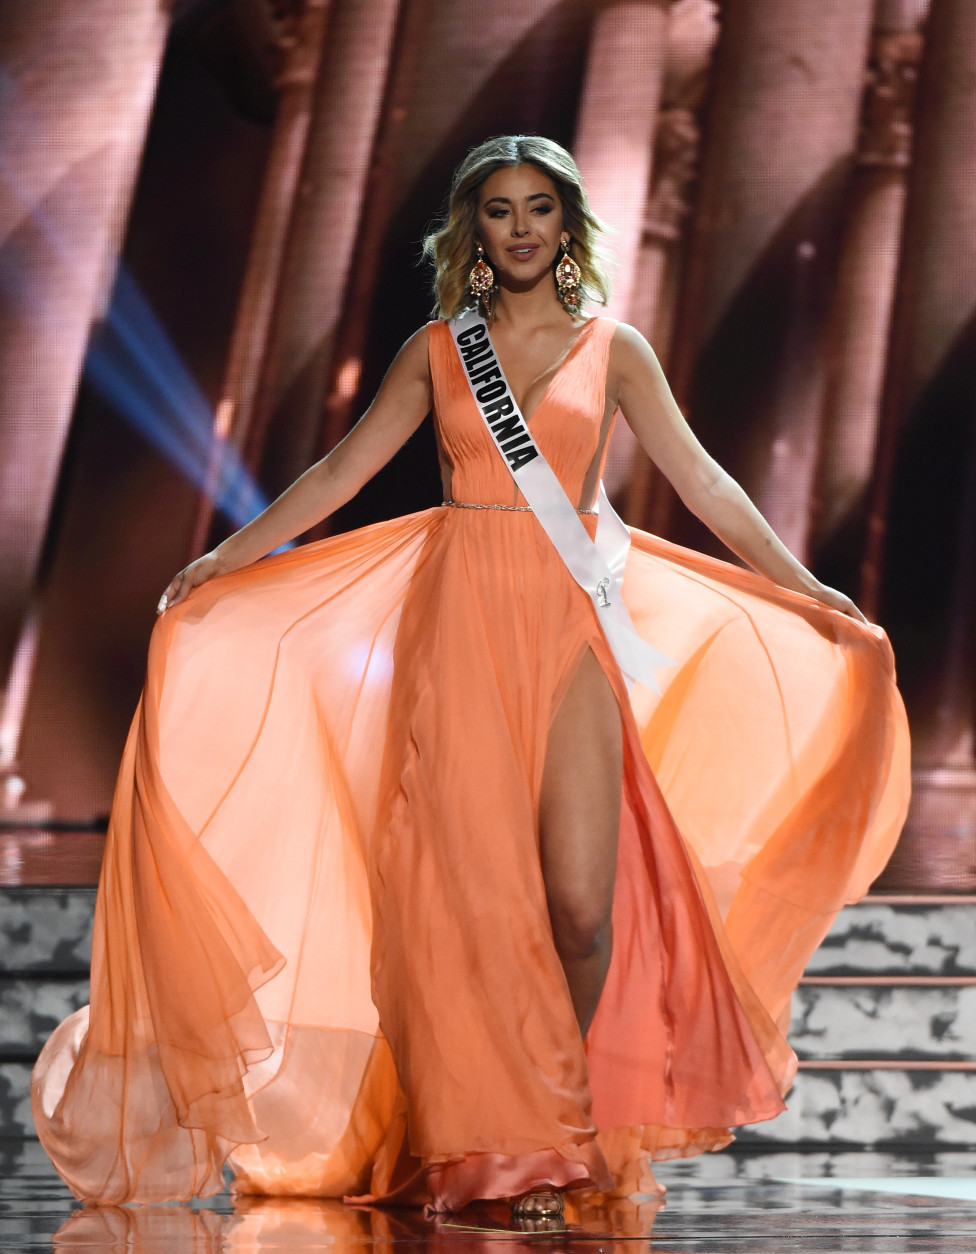 LAS VEGAS, NV - JUNE 01:  Miss California USA Nadia Mejia competes in the evening gown competition during the 2016 Miss USA pageant preliminary competition at T-Mobile Arena on June 1, 2016 in Las Vegas, Nevada. The 2016 Miss USA will be crowned on June 5 in Las Vegas.  (Photo by Ethan Miller/Getty Images)